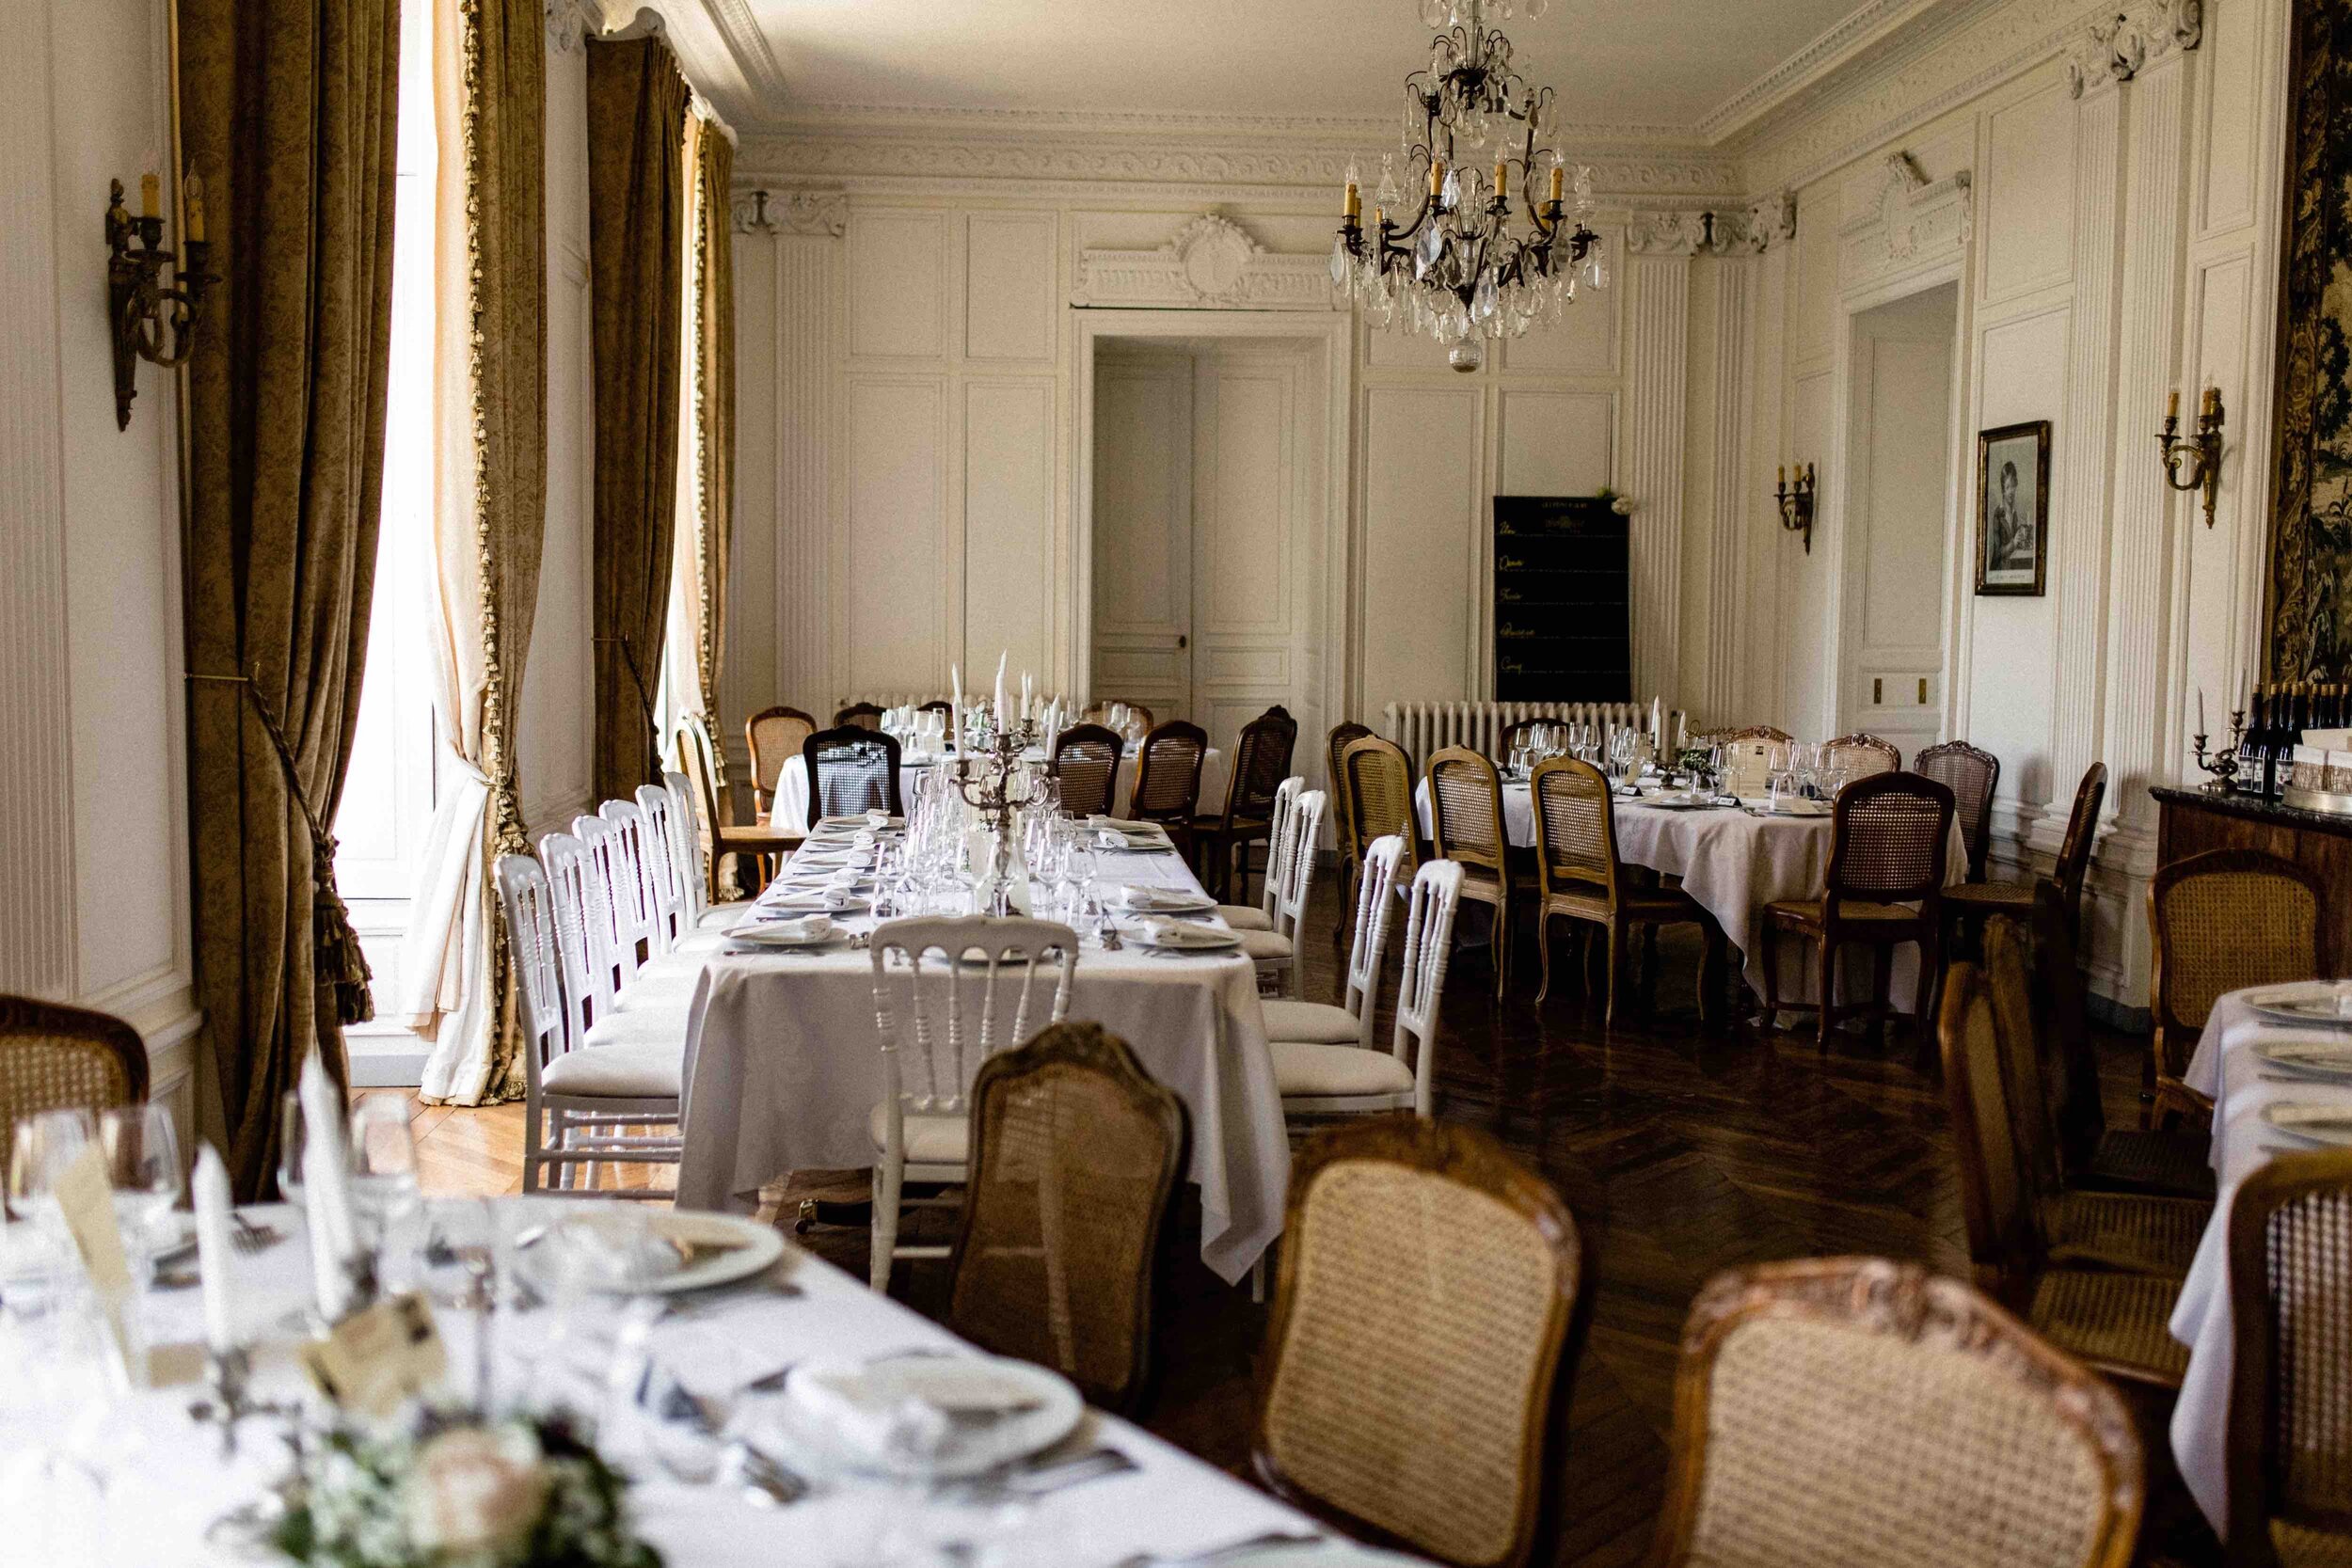 A grand dining room with long tables decorated for a wedding reception at Chateau de Courtomer.